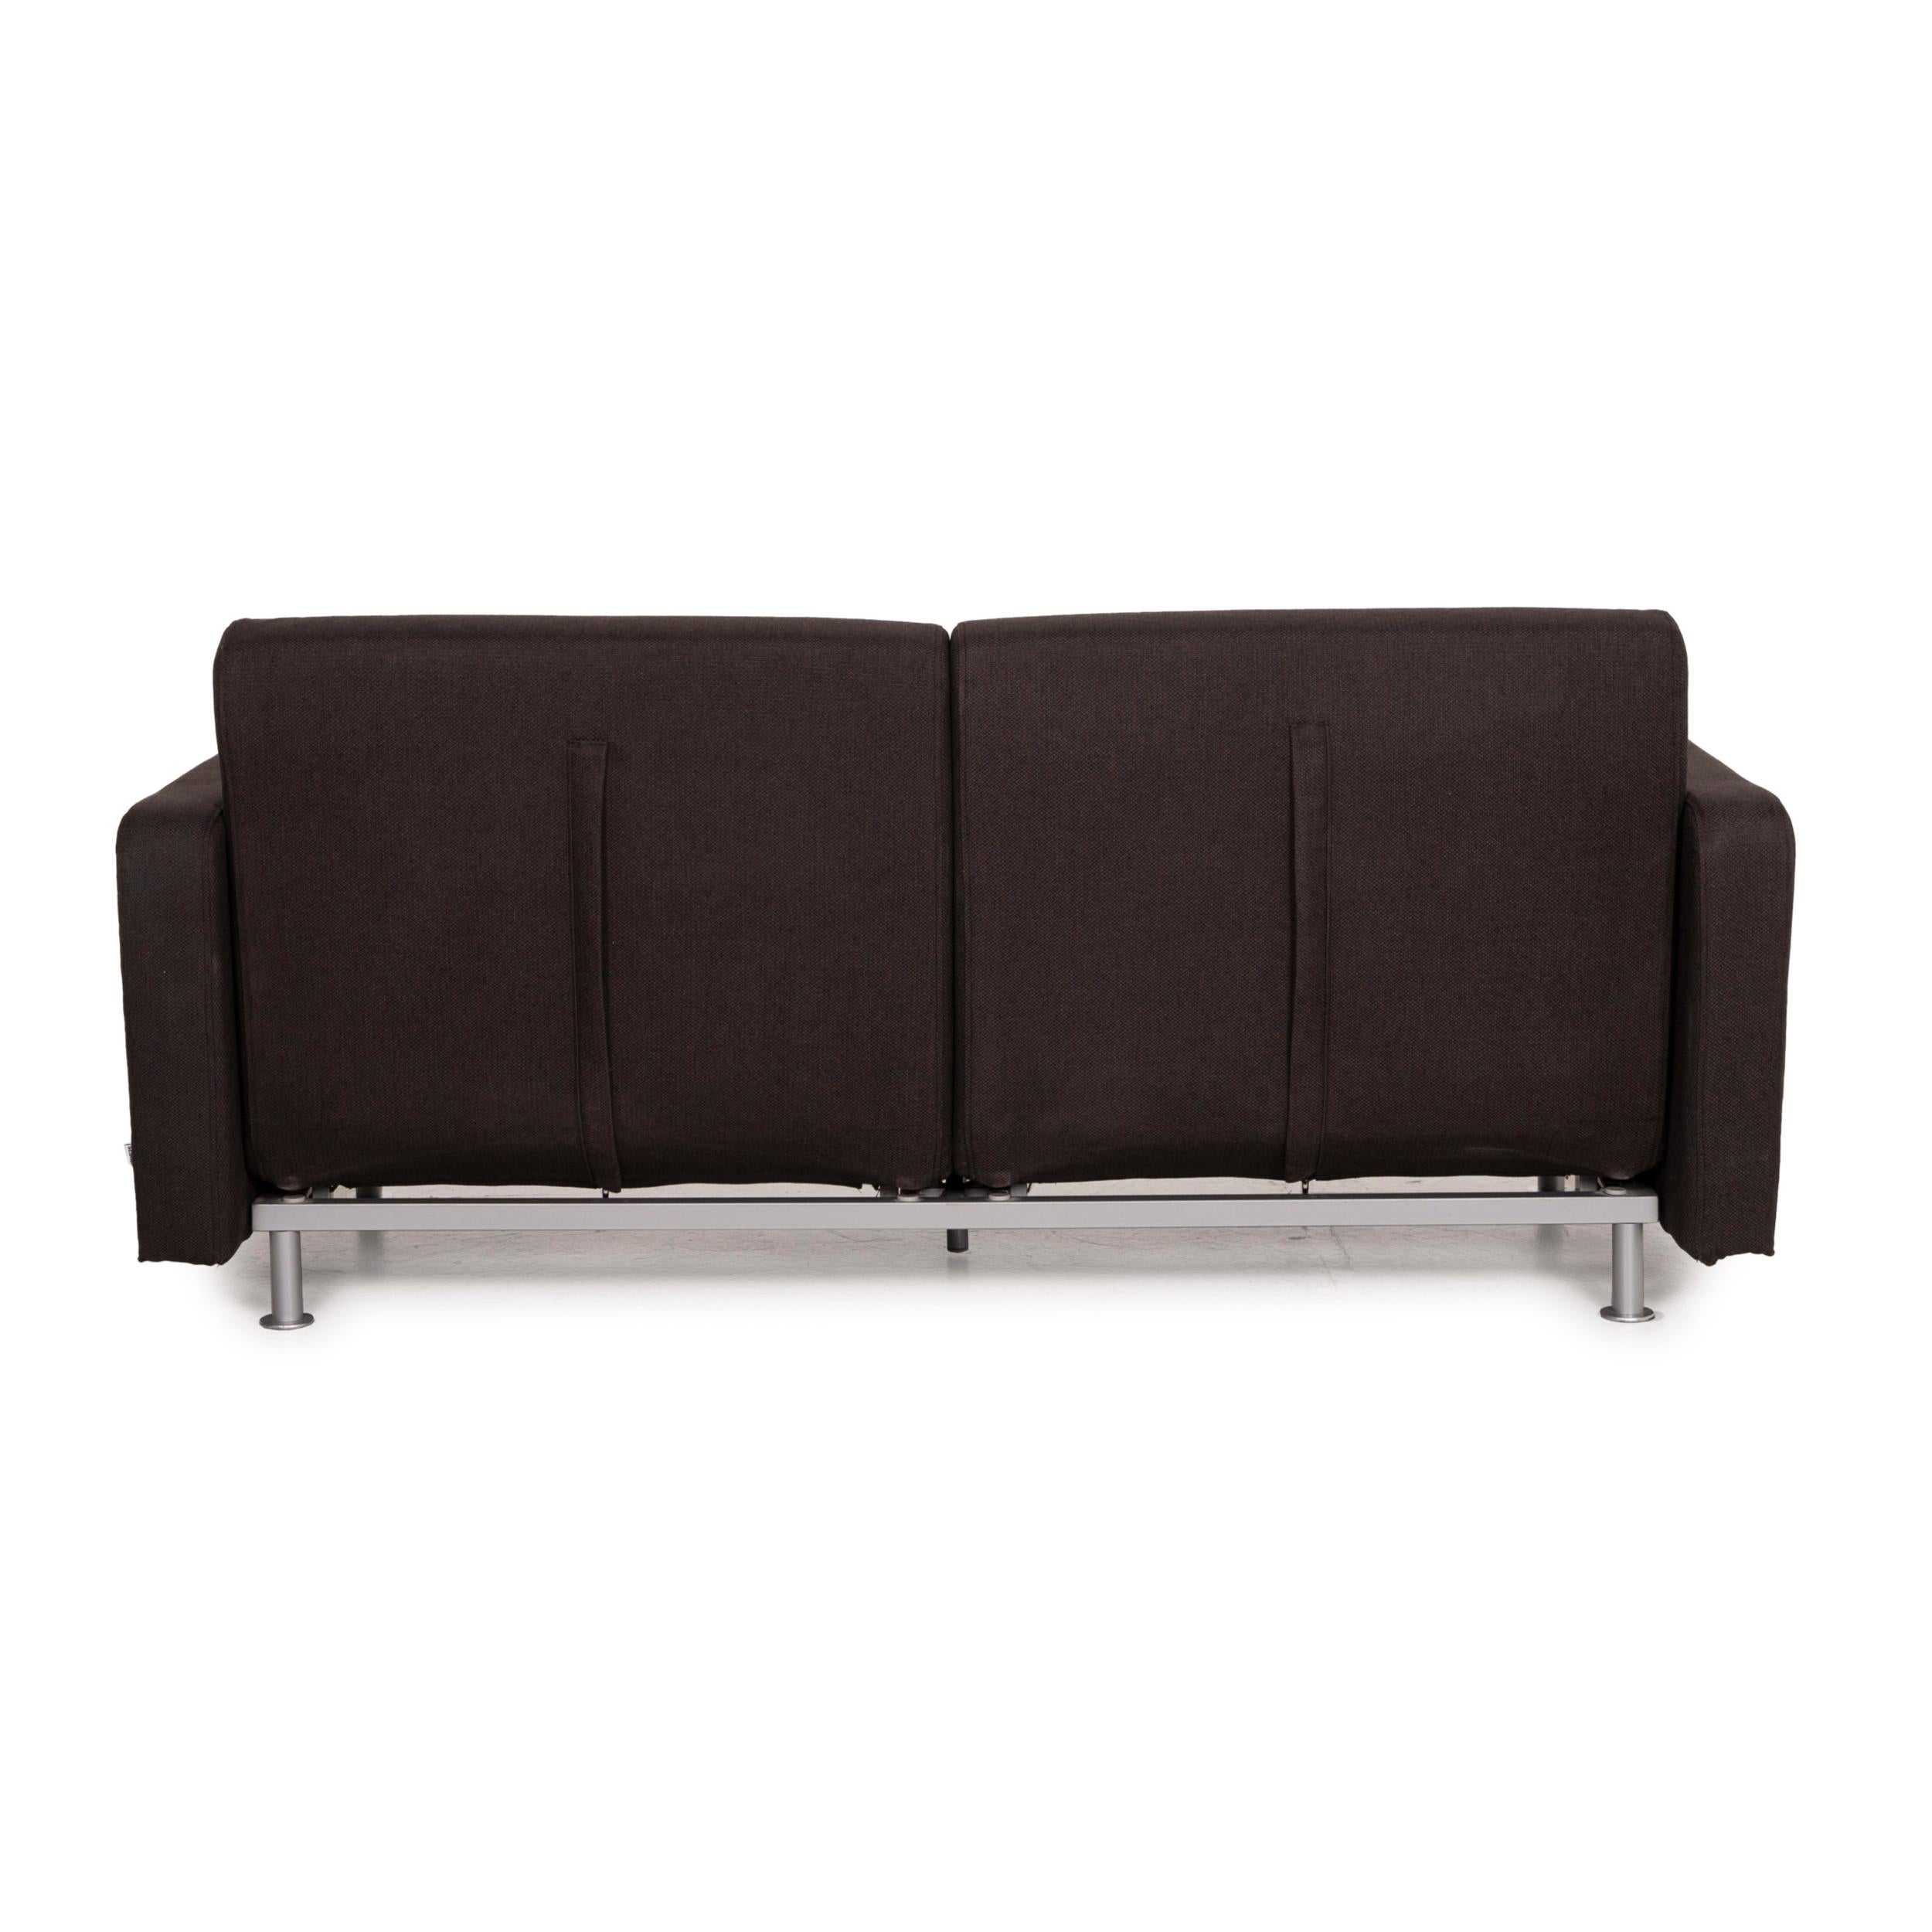 BoConcept Melo Fabric Sofa Brown Two-Seater Relax Function Sofa Bed Dark Brown 2